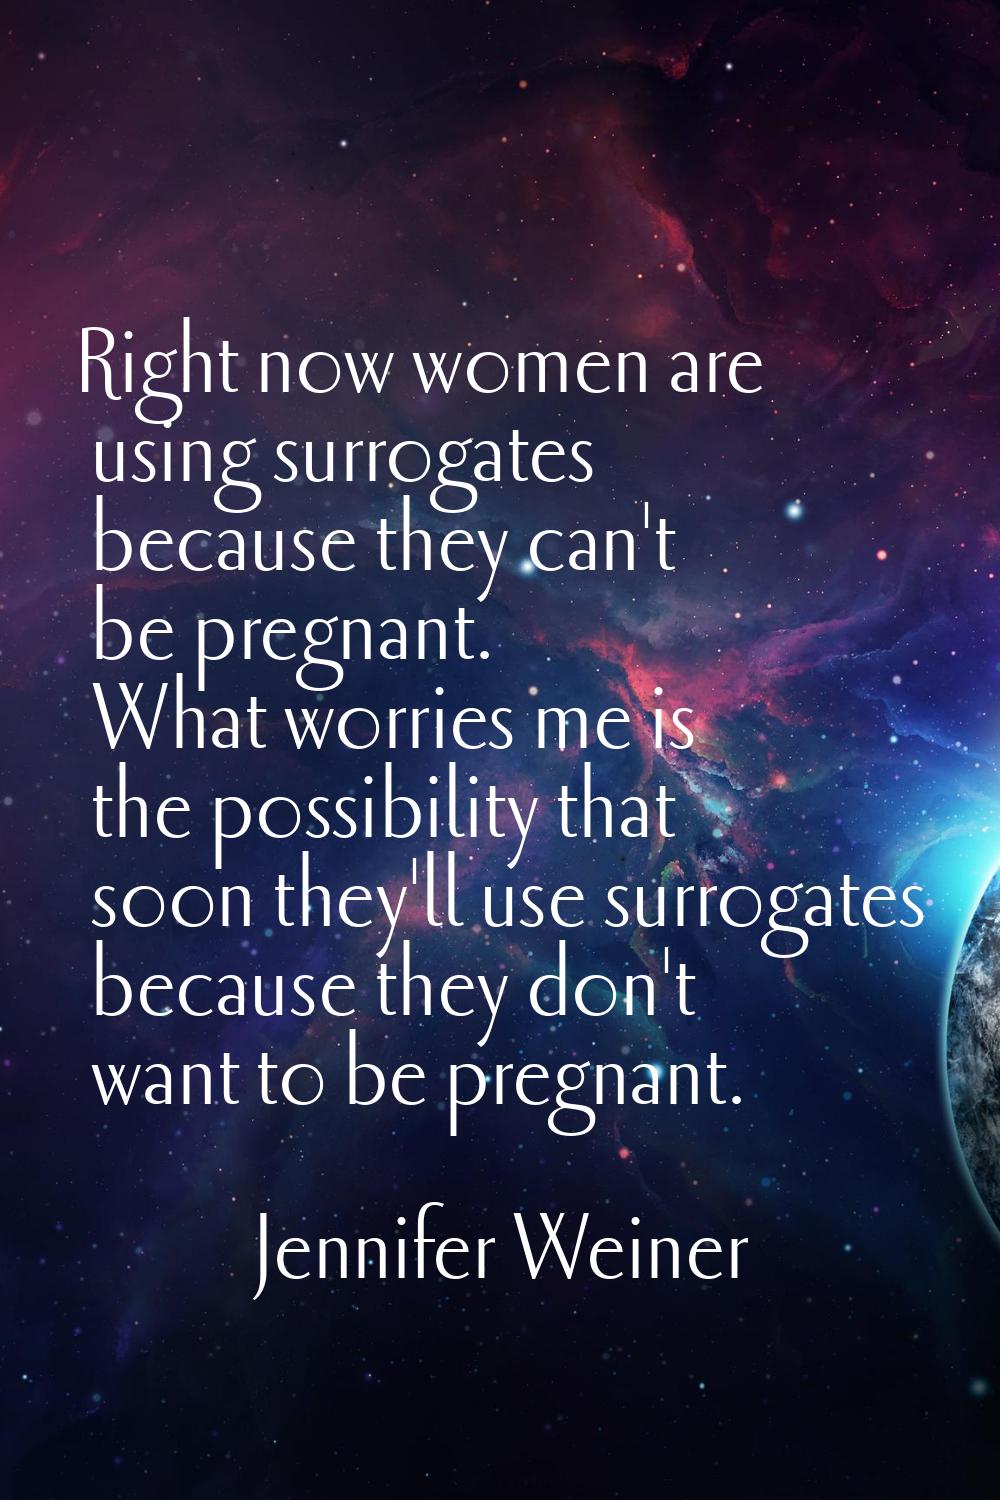 Right now women are using surrogates because they can't be pregnant. What worries me is the possibi